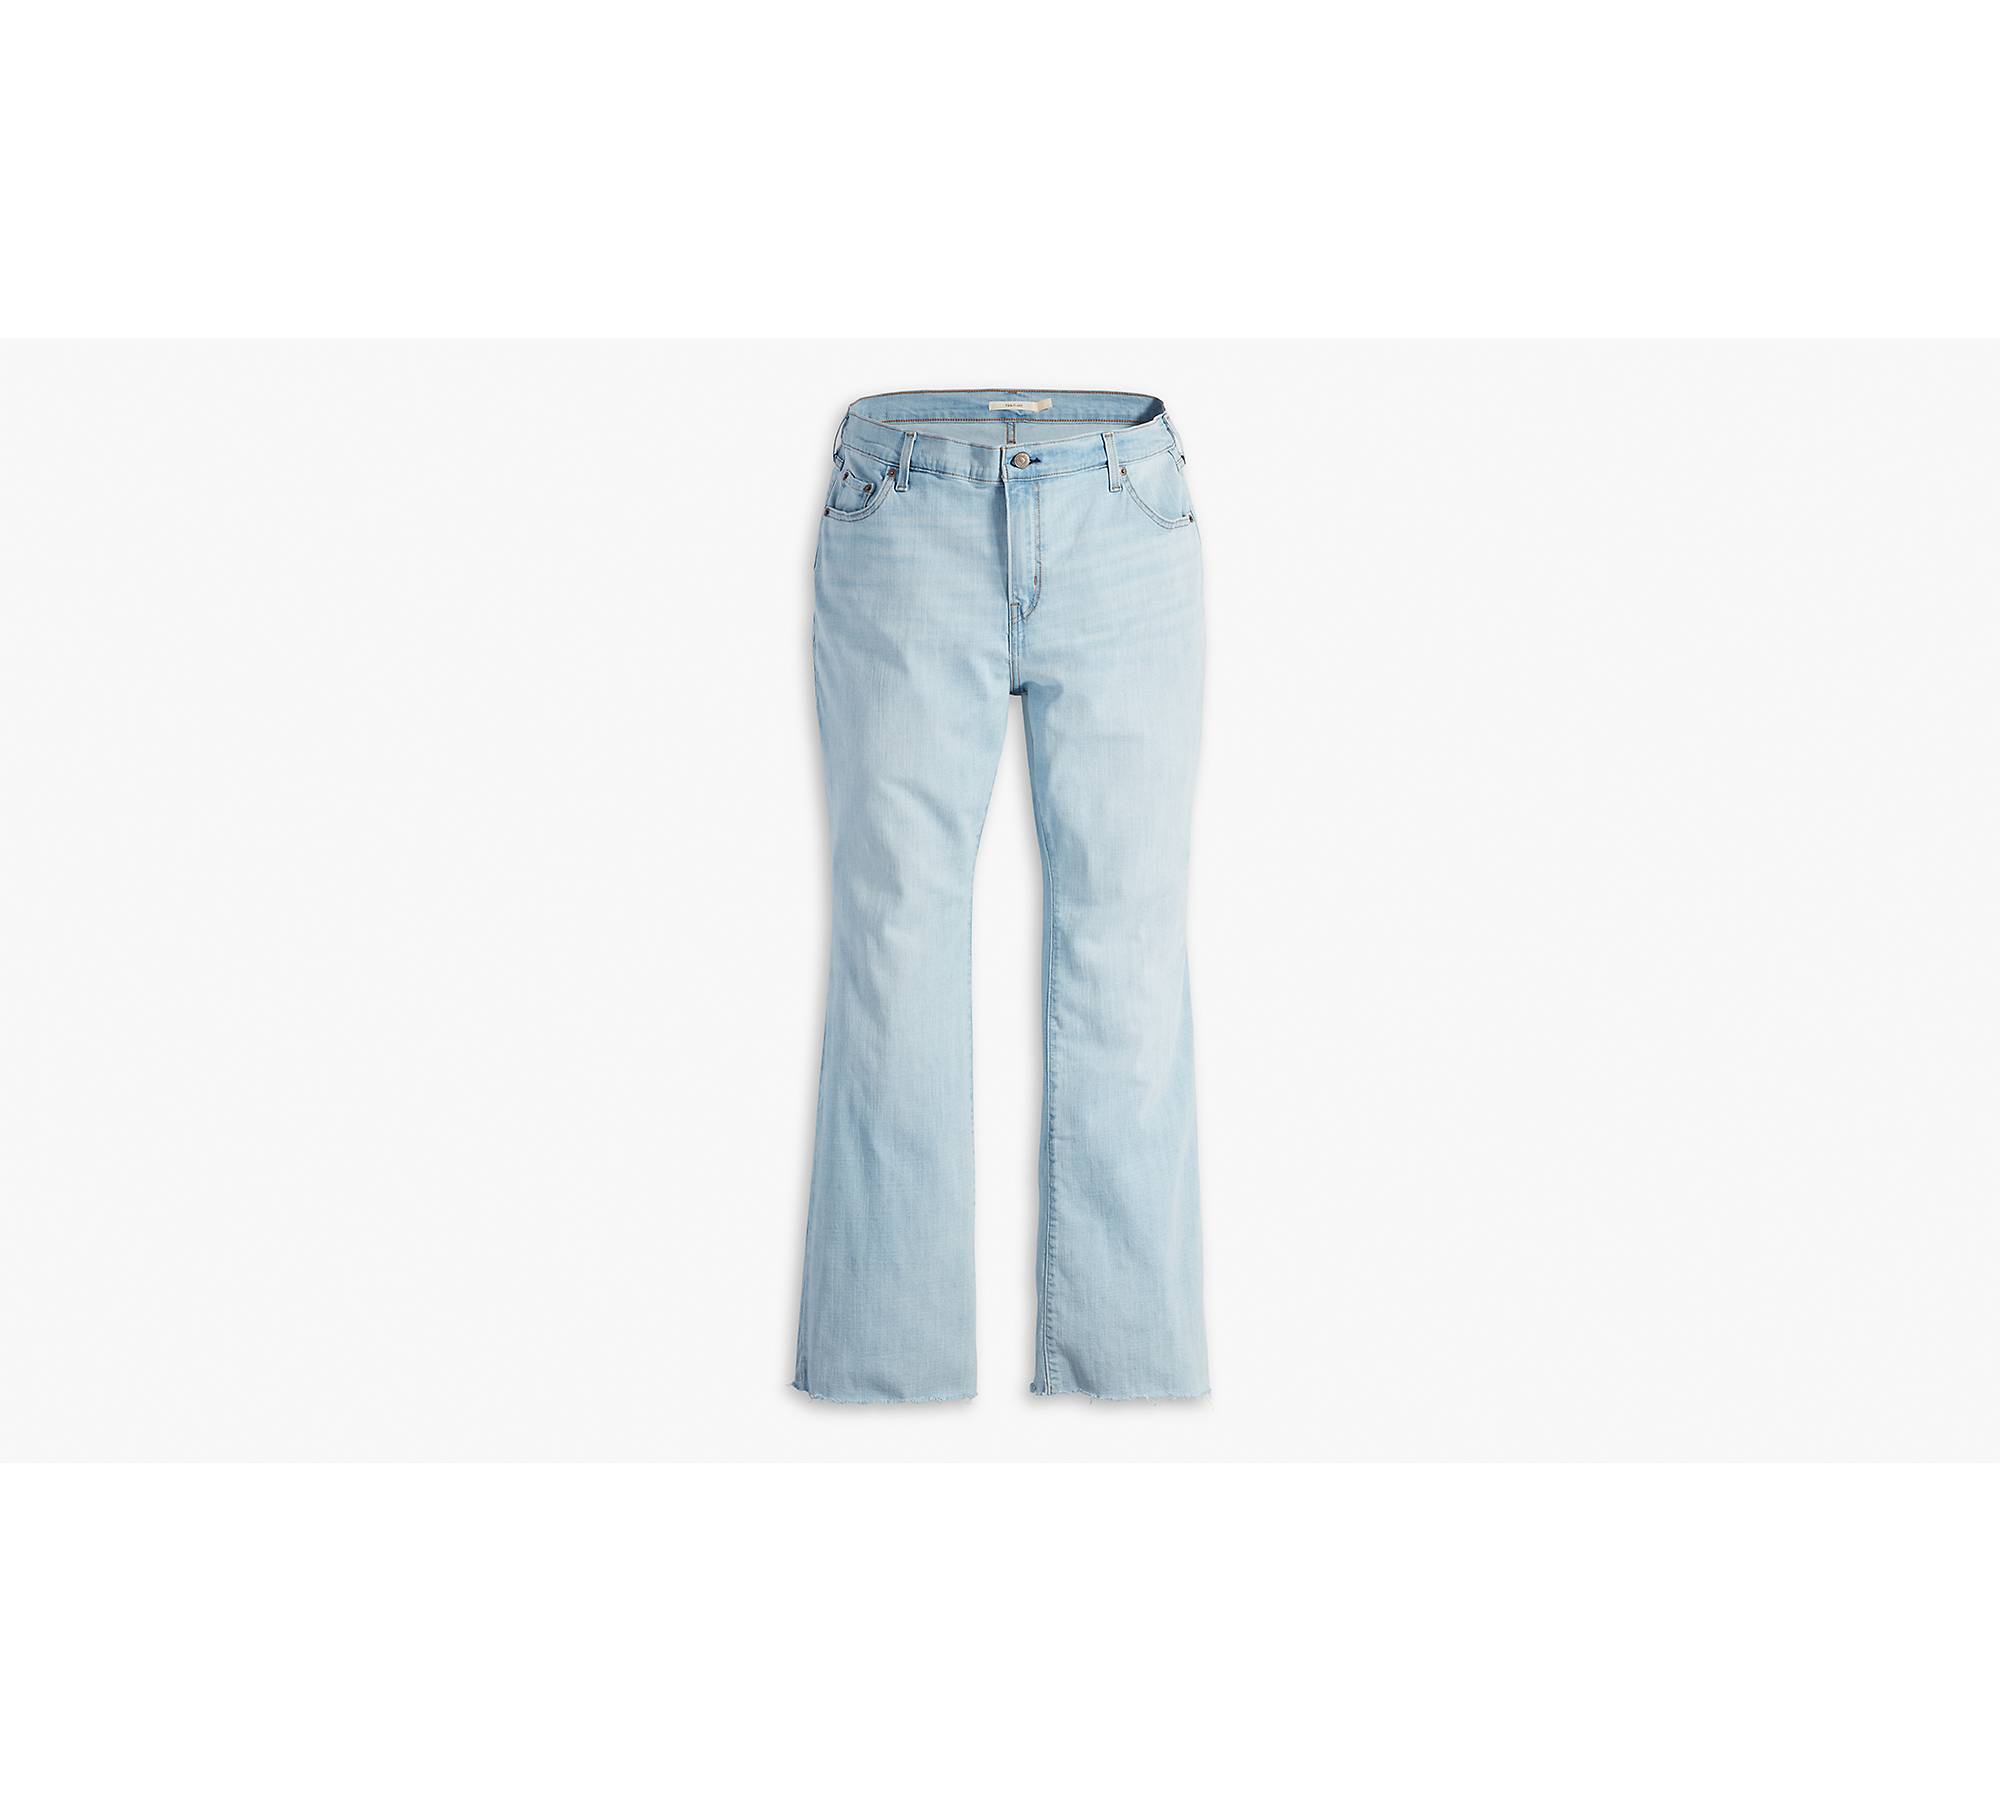 726 High Rise Flare Women's Jeans (plus Size) - Light Wash